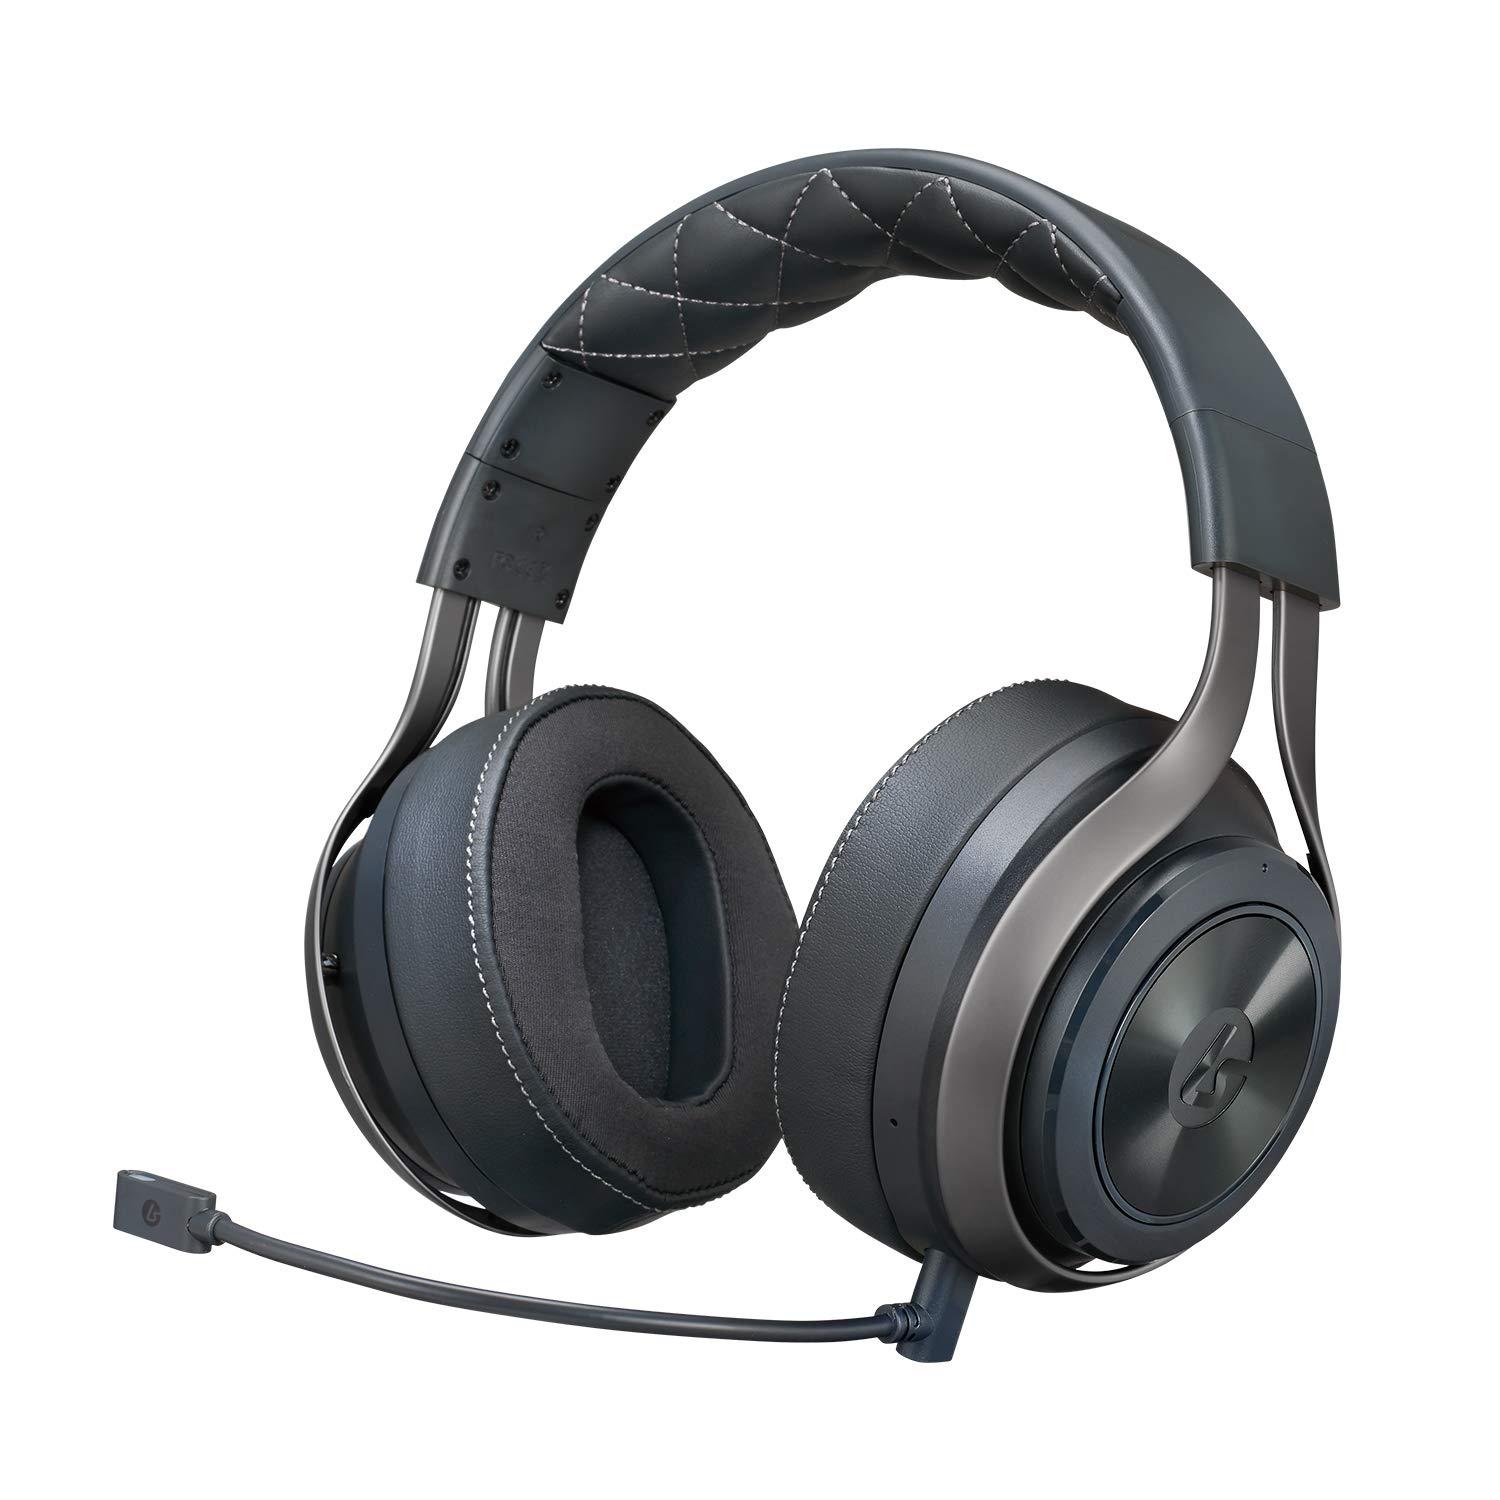 LS41 Premium Surround Sound Wireless Gaming Headset for $129.99 Shipped